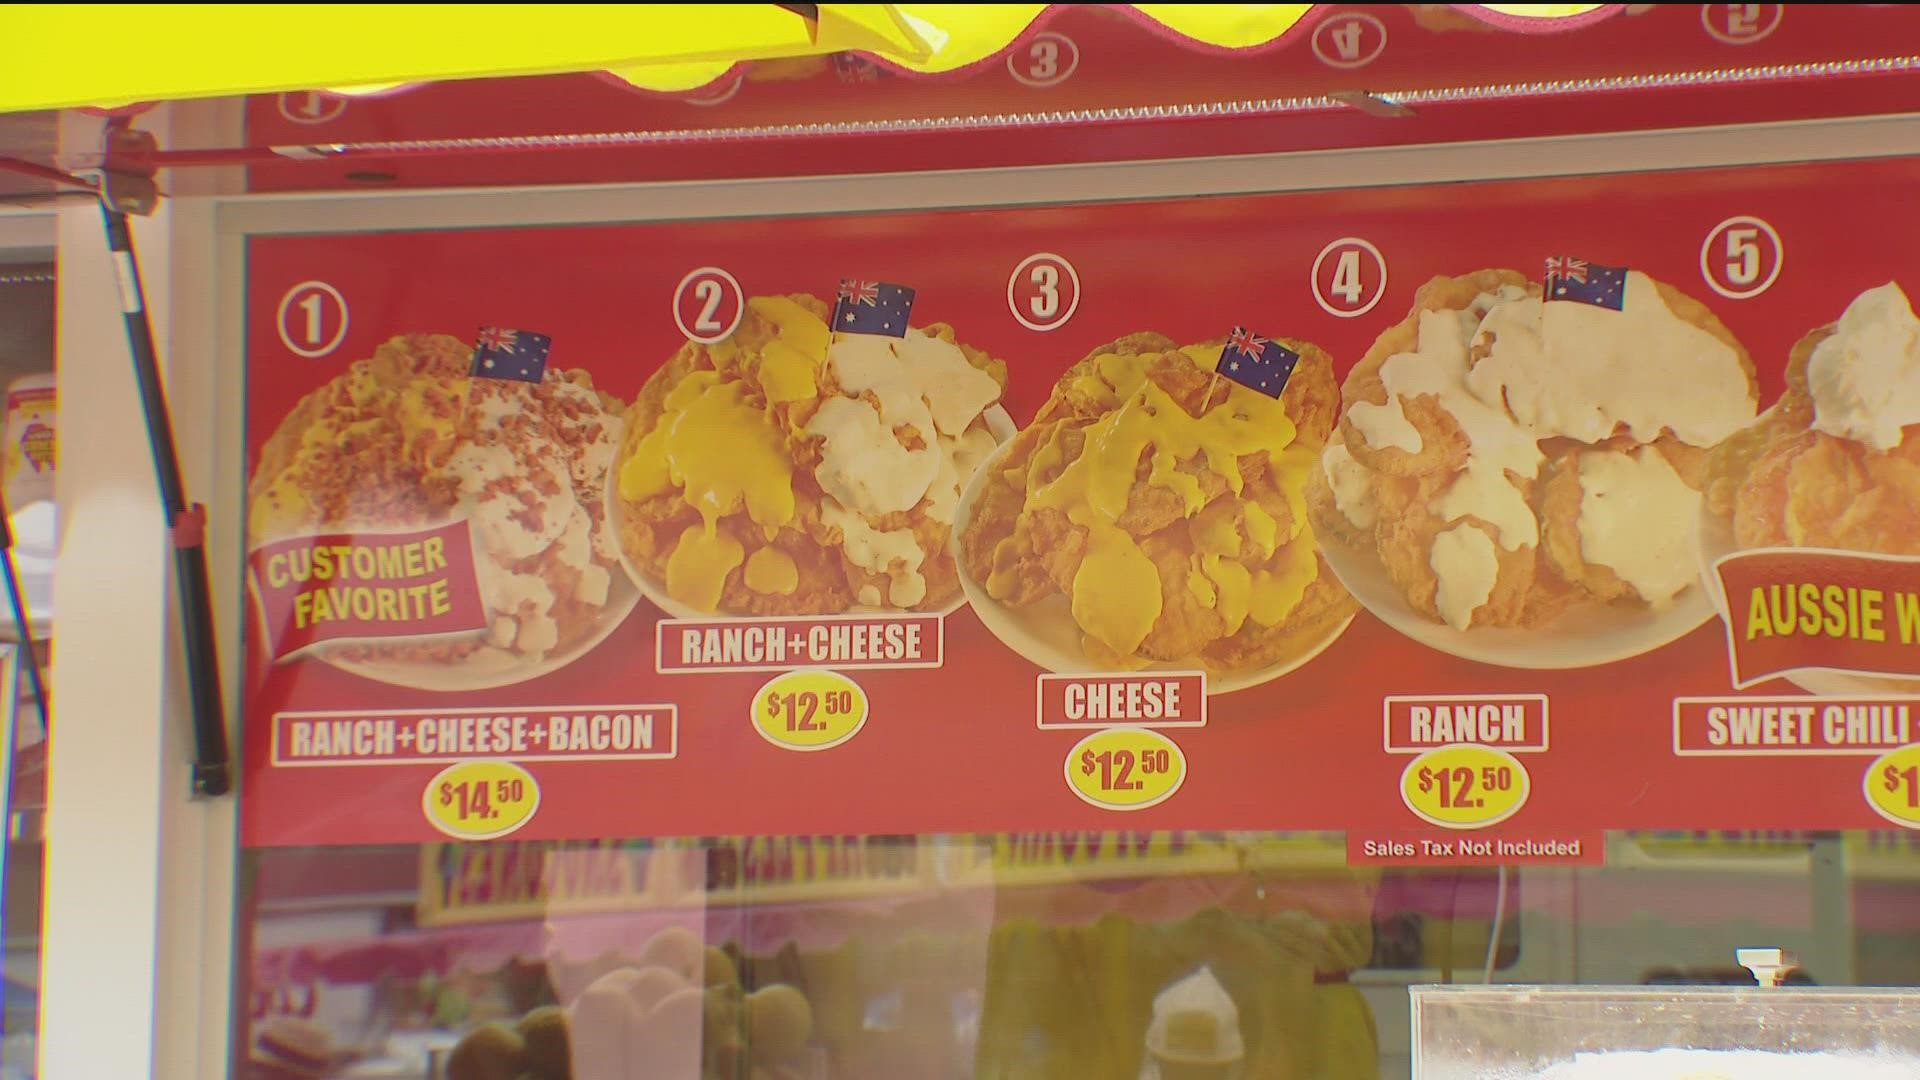 Inflation creates high prices for food at San Diego County Fair